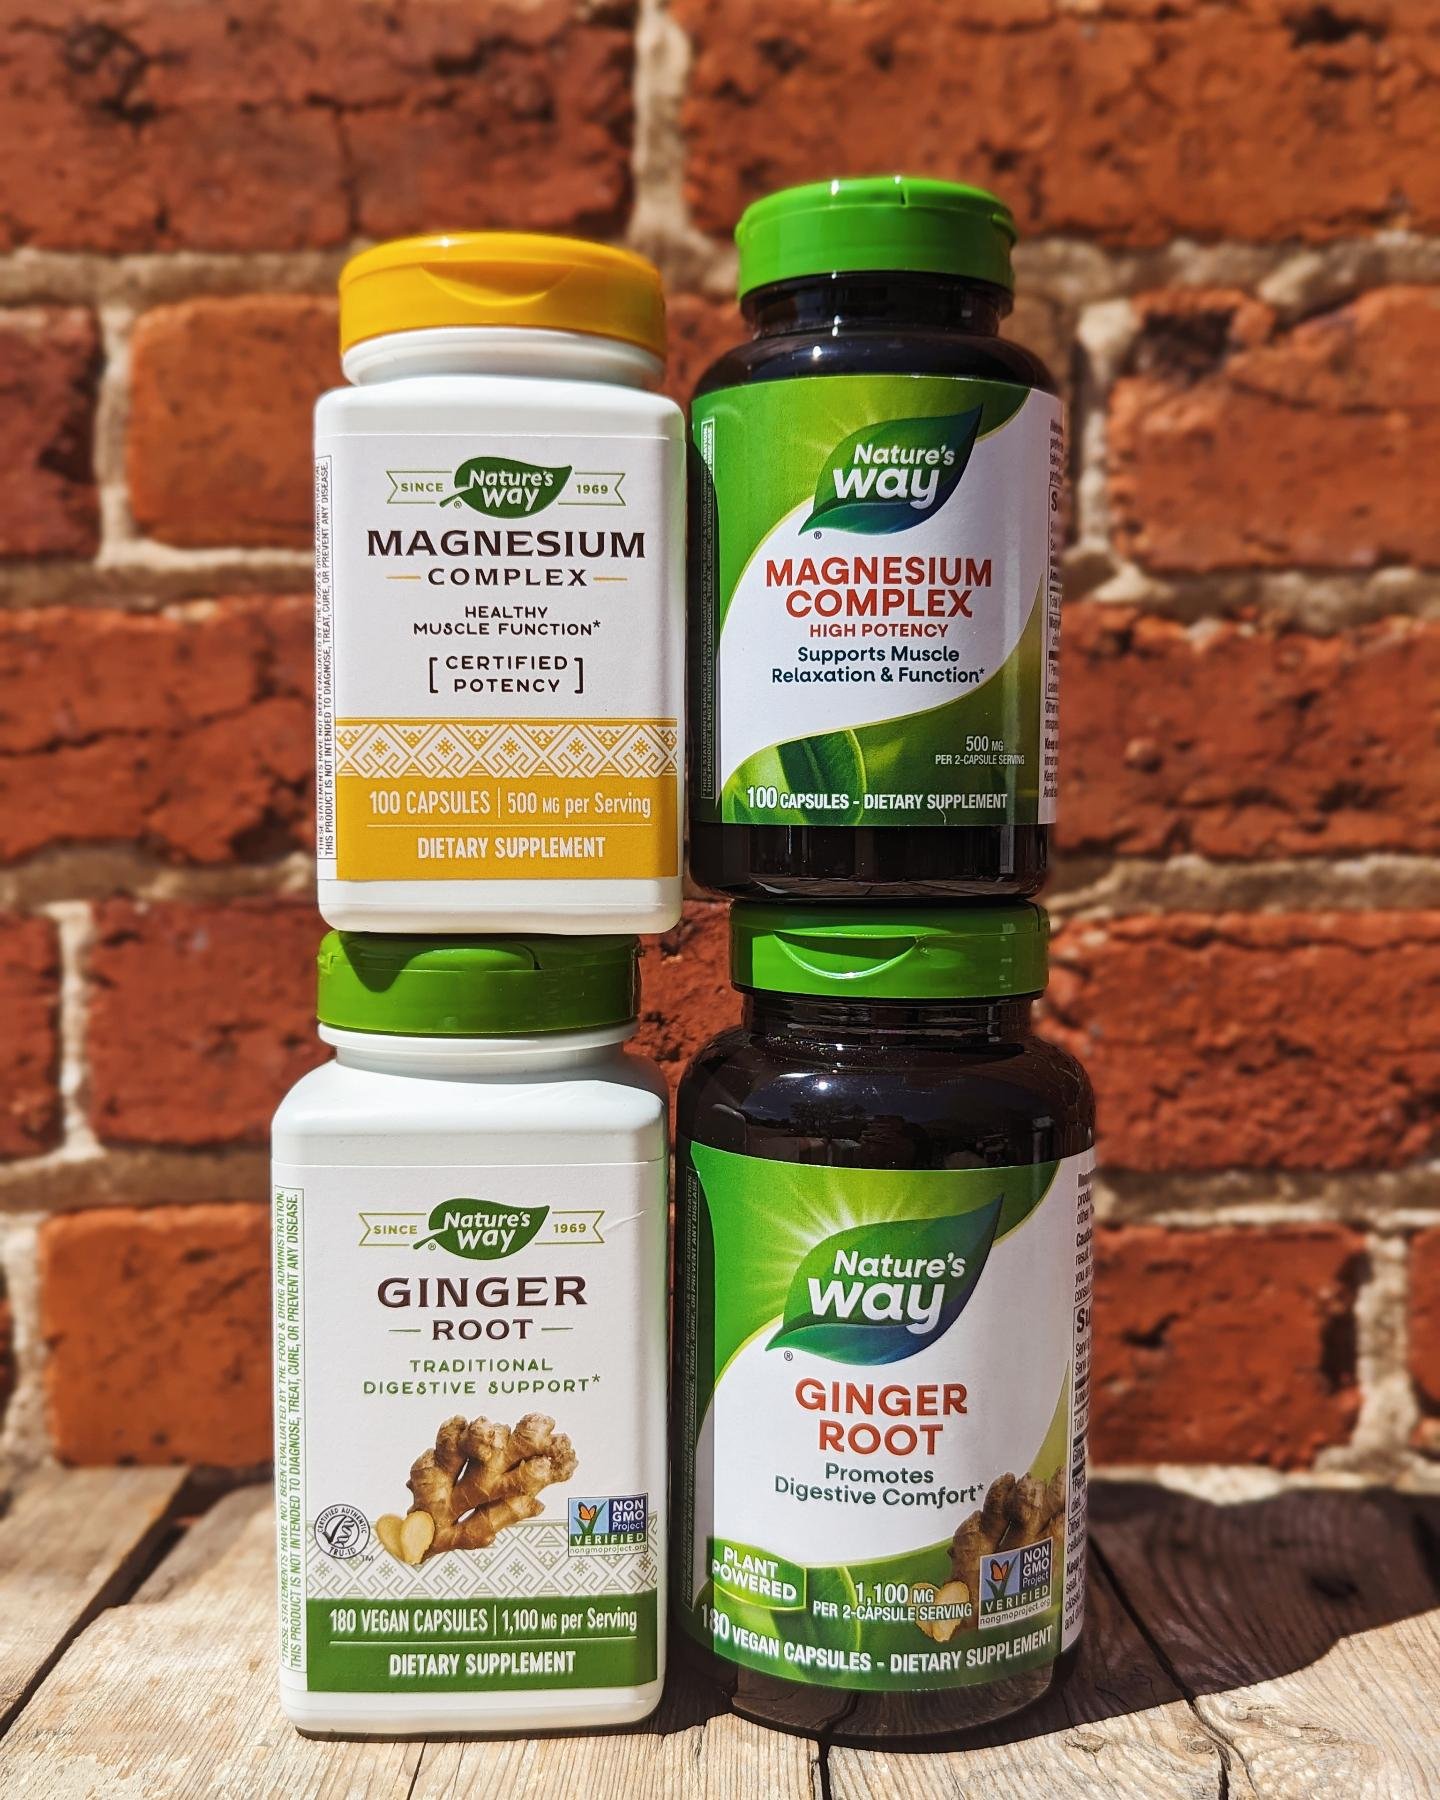 Package change! 🌱

We wanted to bring it to everyone's attention that Nature's Way supplements are going through a package change (before on the left, after on the right). Don't worry, the formulas are staying the same! From vitamins to herbs, Natur